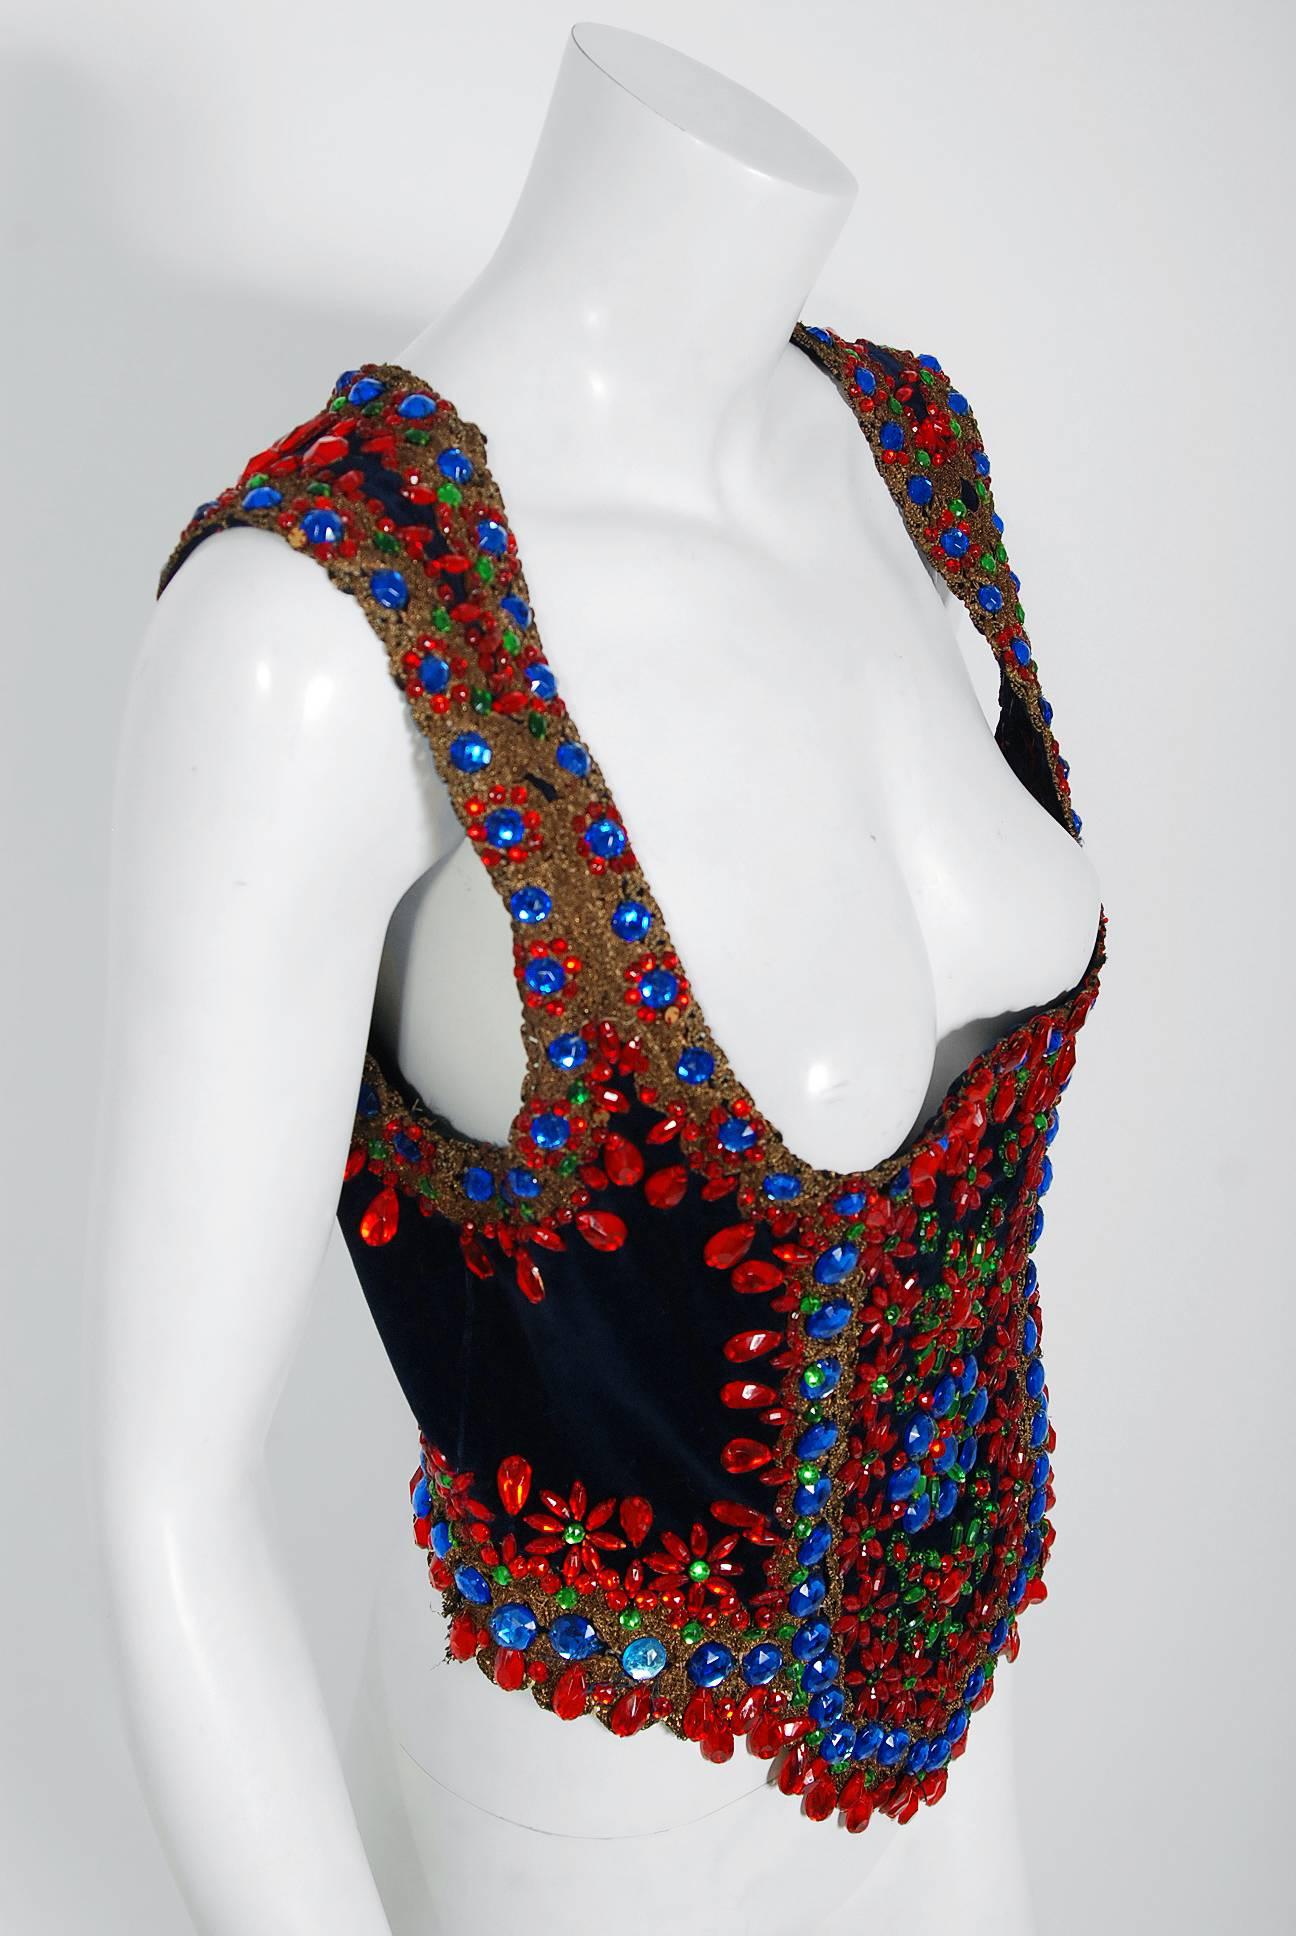 This sensational 1960's custom couture dark navy velvet décolletage bodice is lavishly embellished with red, green, and blue large faceted jewels and sparkling bronzed gold metallic lace.  The highly stylized shape perfectly captures that bohemian